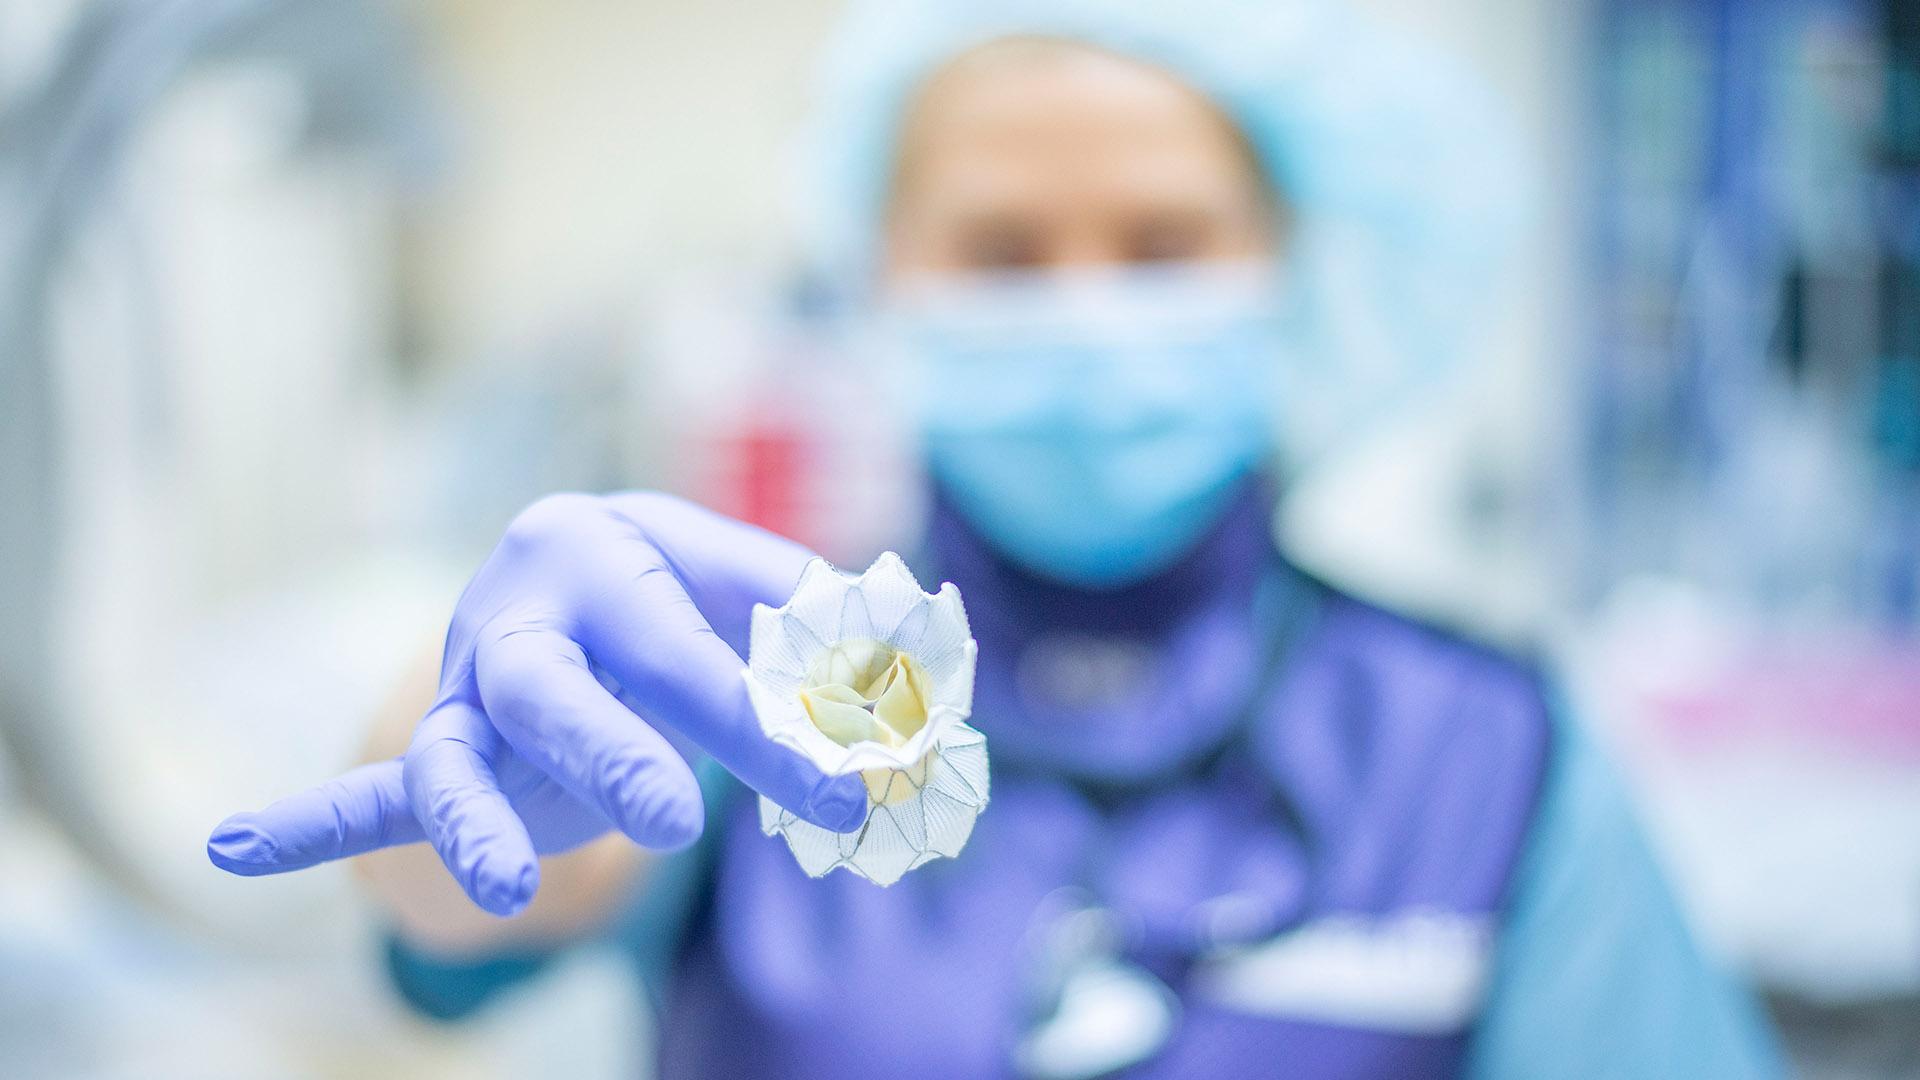 Flower-like TAVR device at forefront held by woman in pale blue surgical garb with lavender surgical glove and dark blue overgarment 